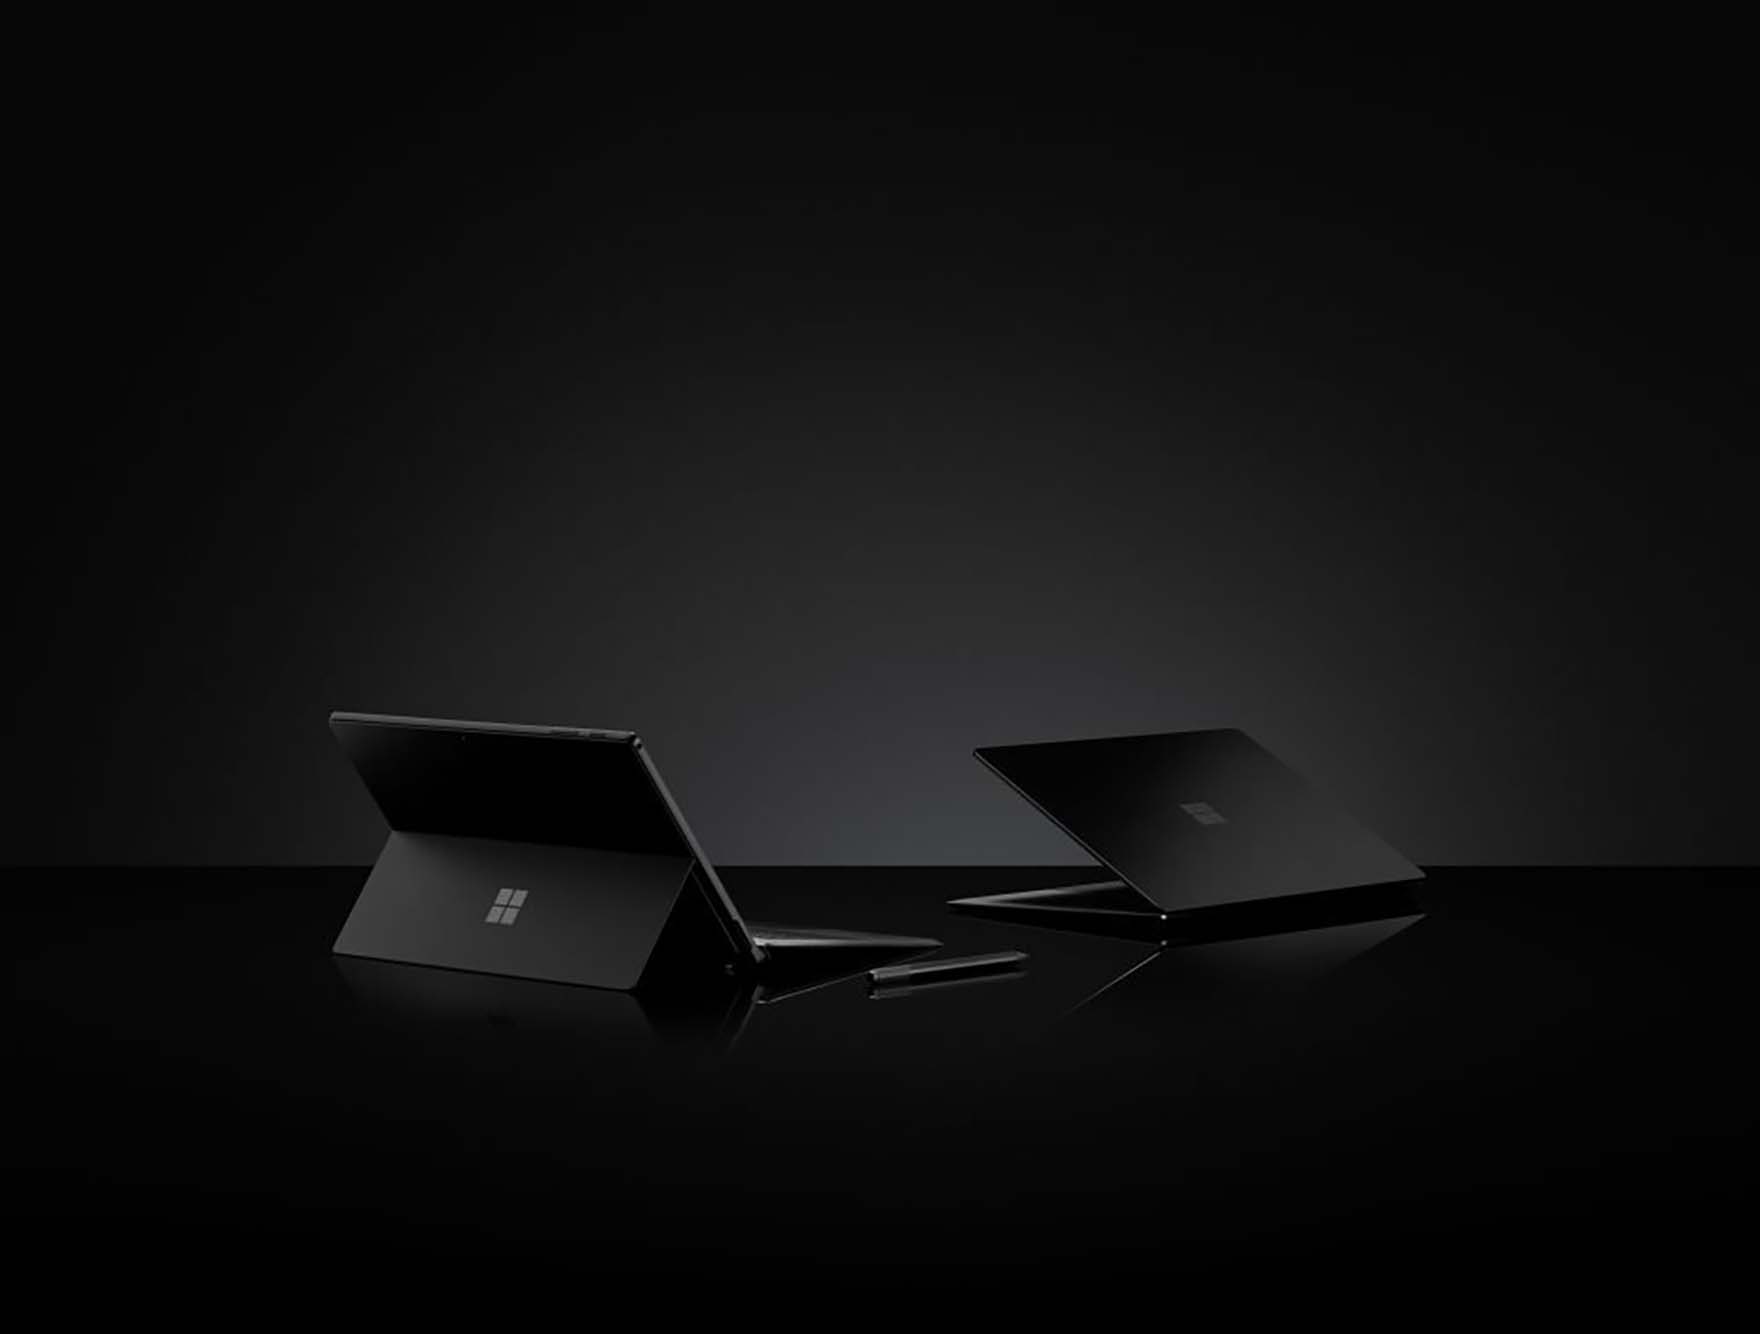 Surface Pro 6 and Surface Laptop 2 available today 7bff59010b6e856580826d1b704eafe3.jpg